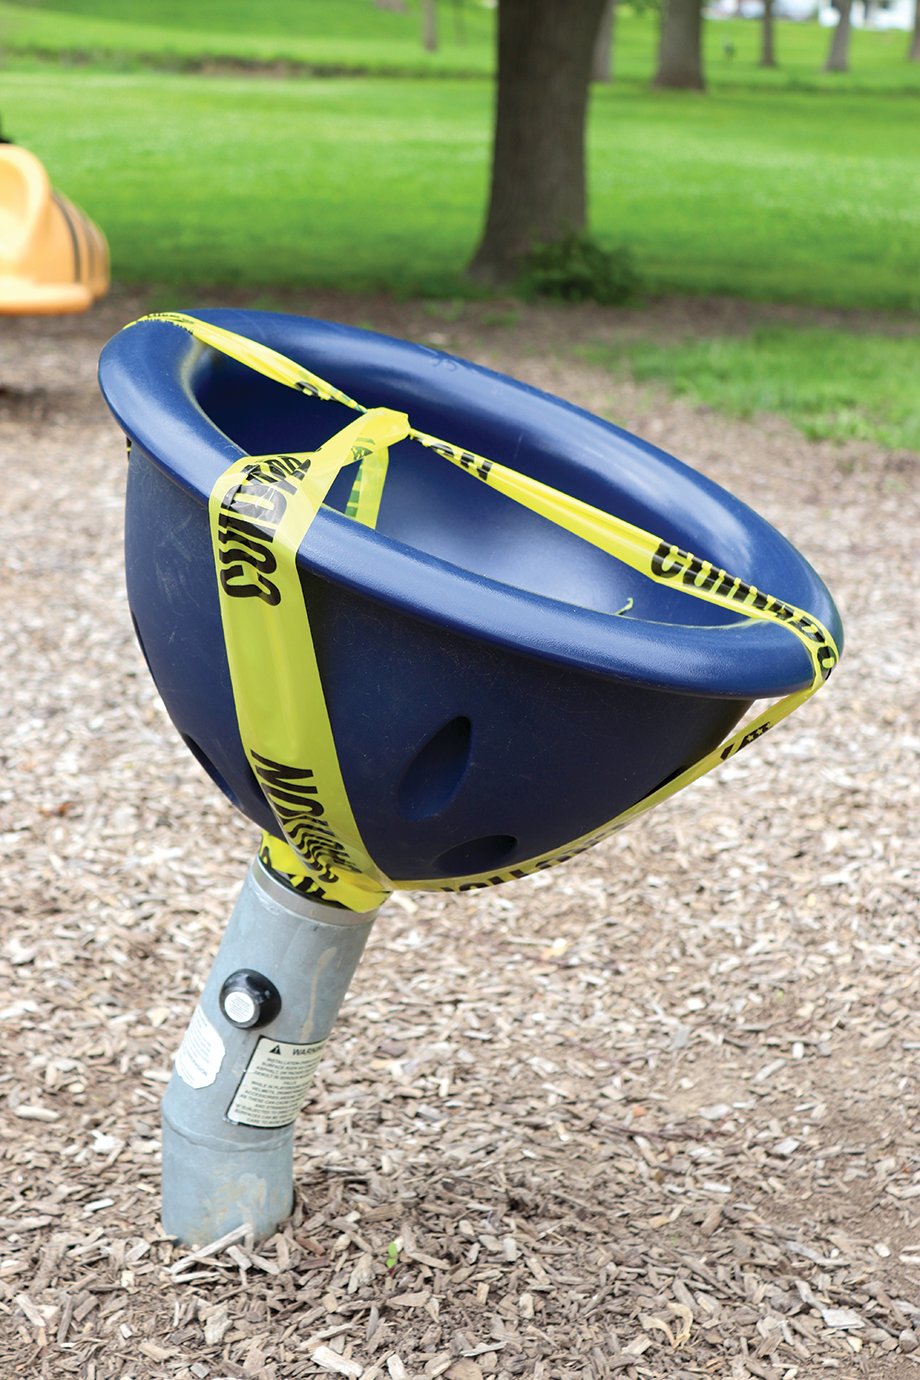 Slides, swing sets and other playground equipment stand dormant under caution tape Monday at Milligan Park. Though most park services have reopened, high-contact equipment such as playgrounds remained off limits until further notice.